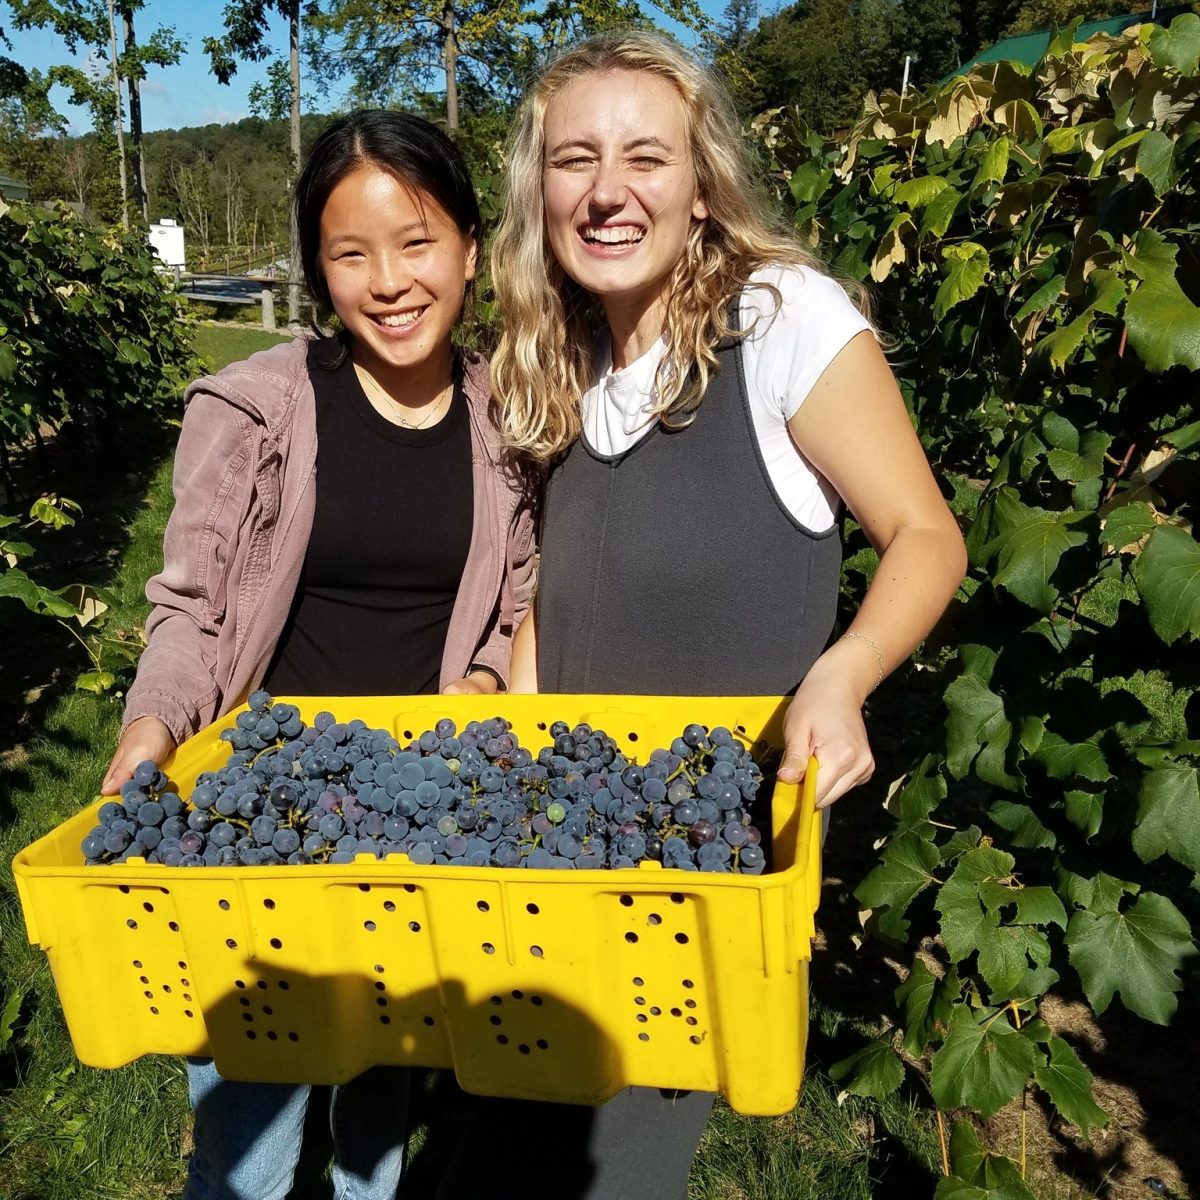 Chemistry+Students+Help+Bring+in+Harvest+at+Local+Winery